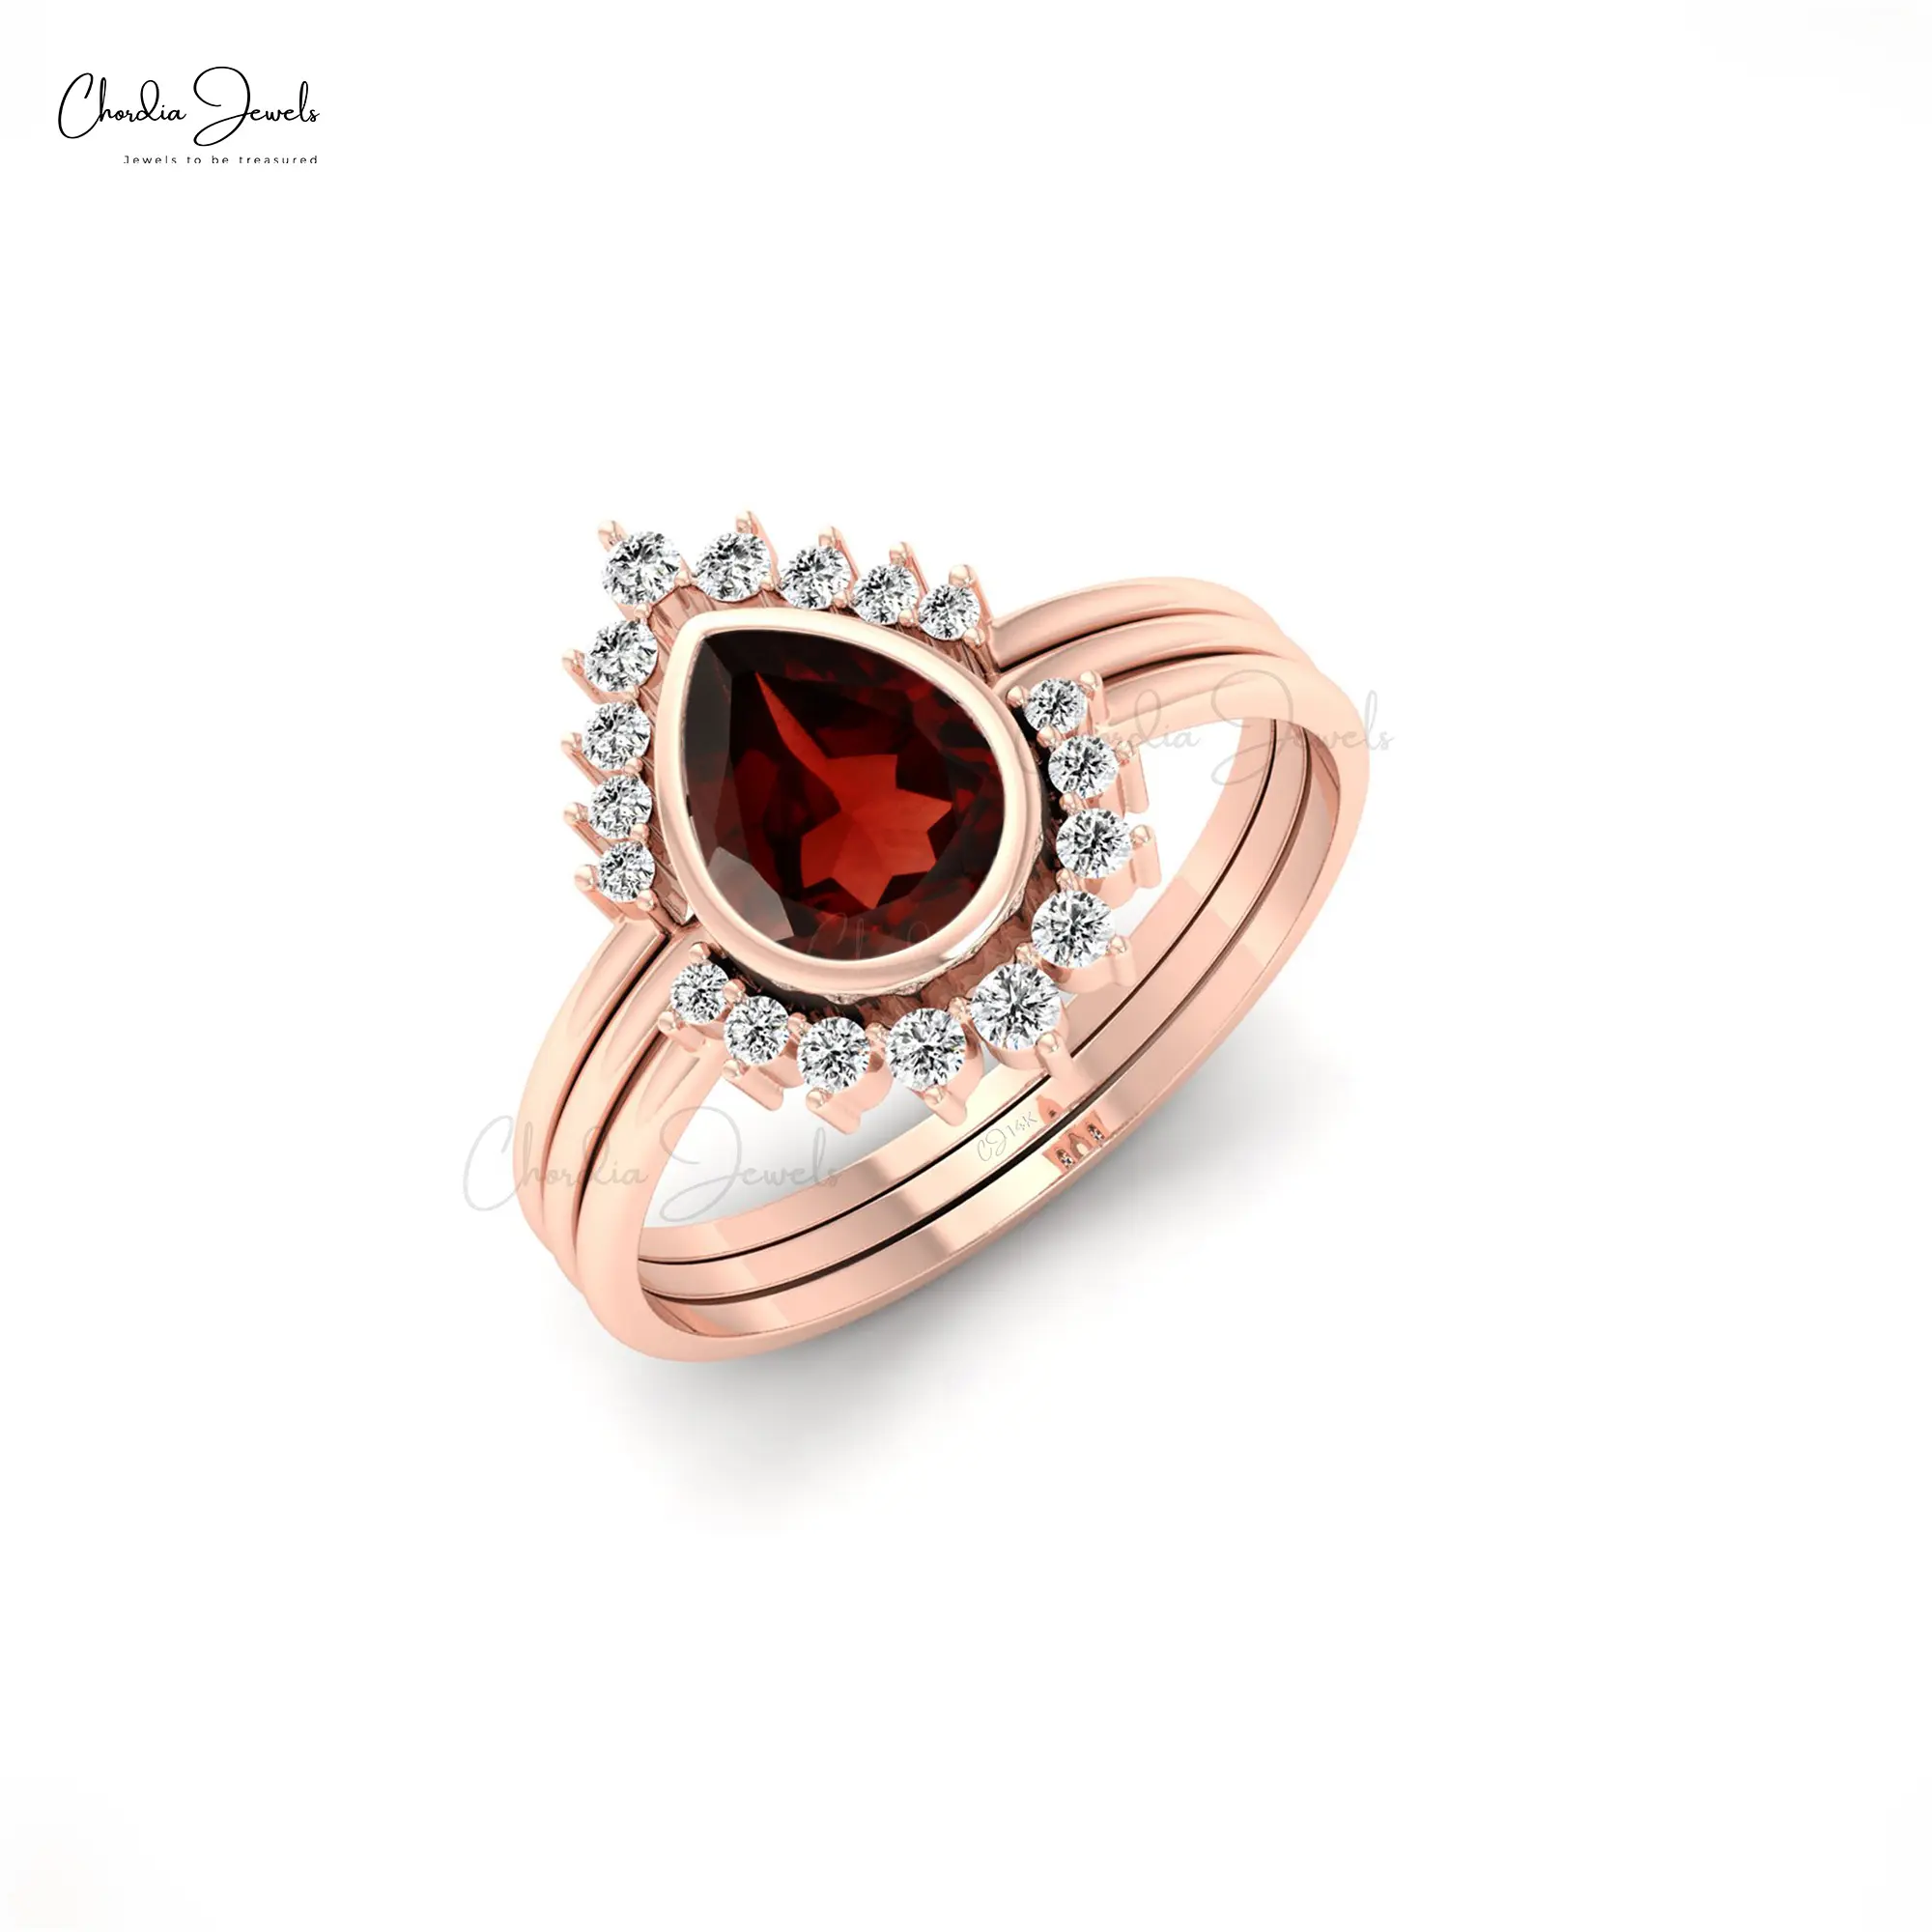 Authentic 0.63 Ct Garnet Pear Gemstone Ring 14k Solid Gold White Diamond Ring Multi Band Stacking Ring Factory Wholesale Price